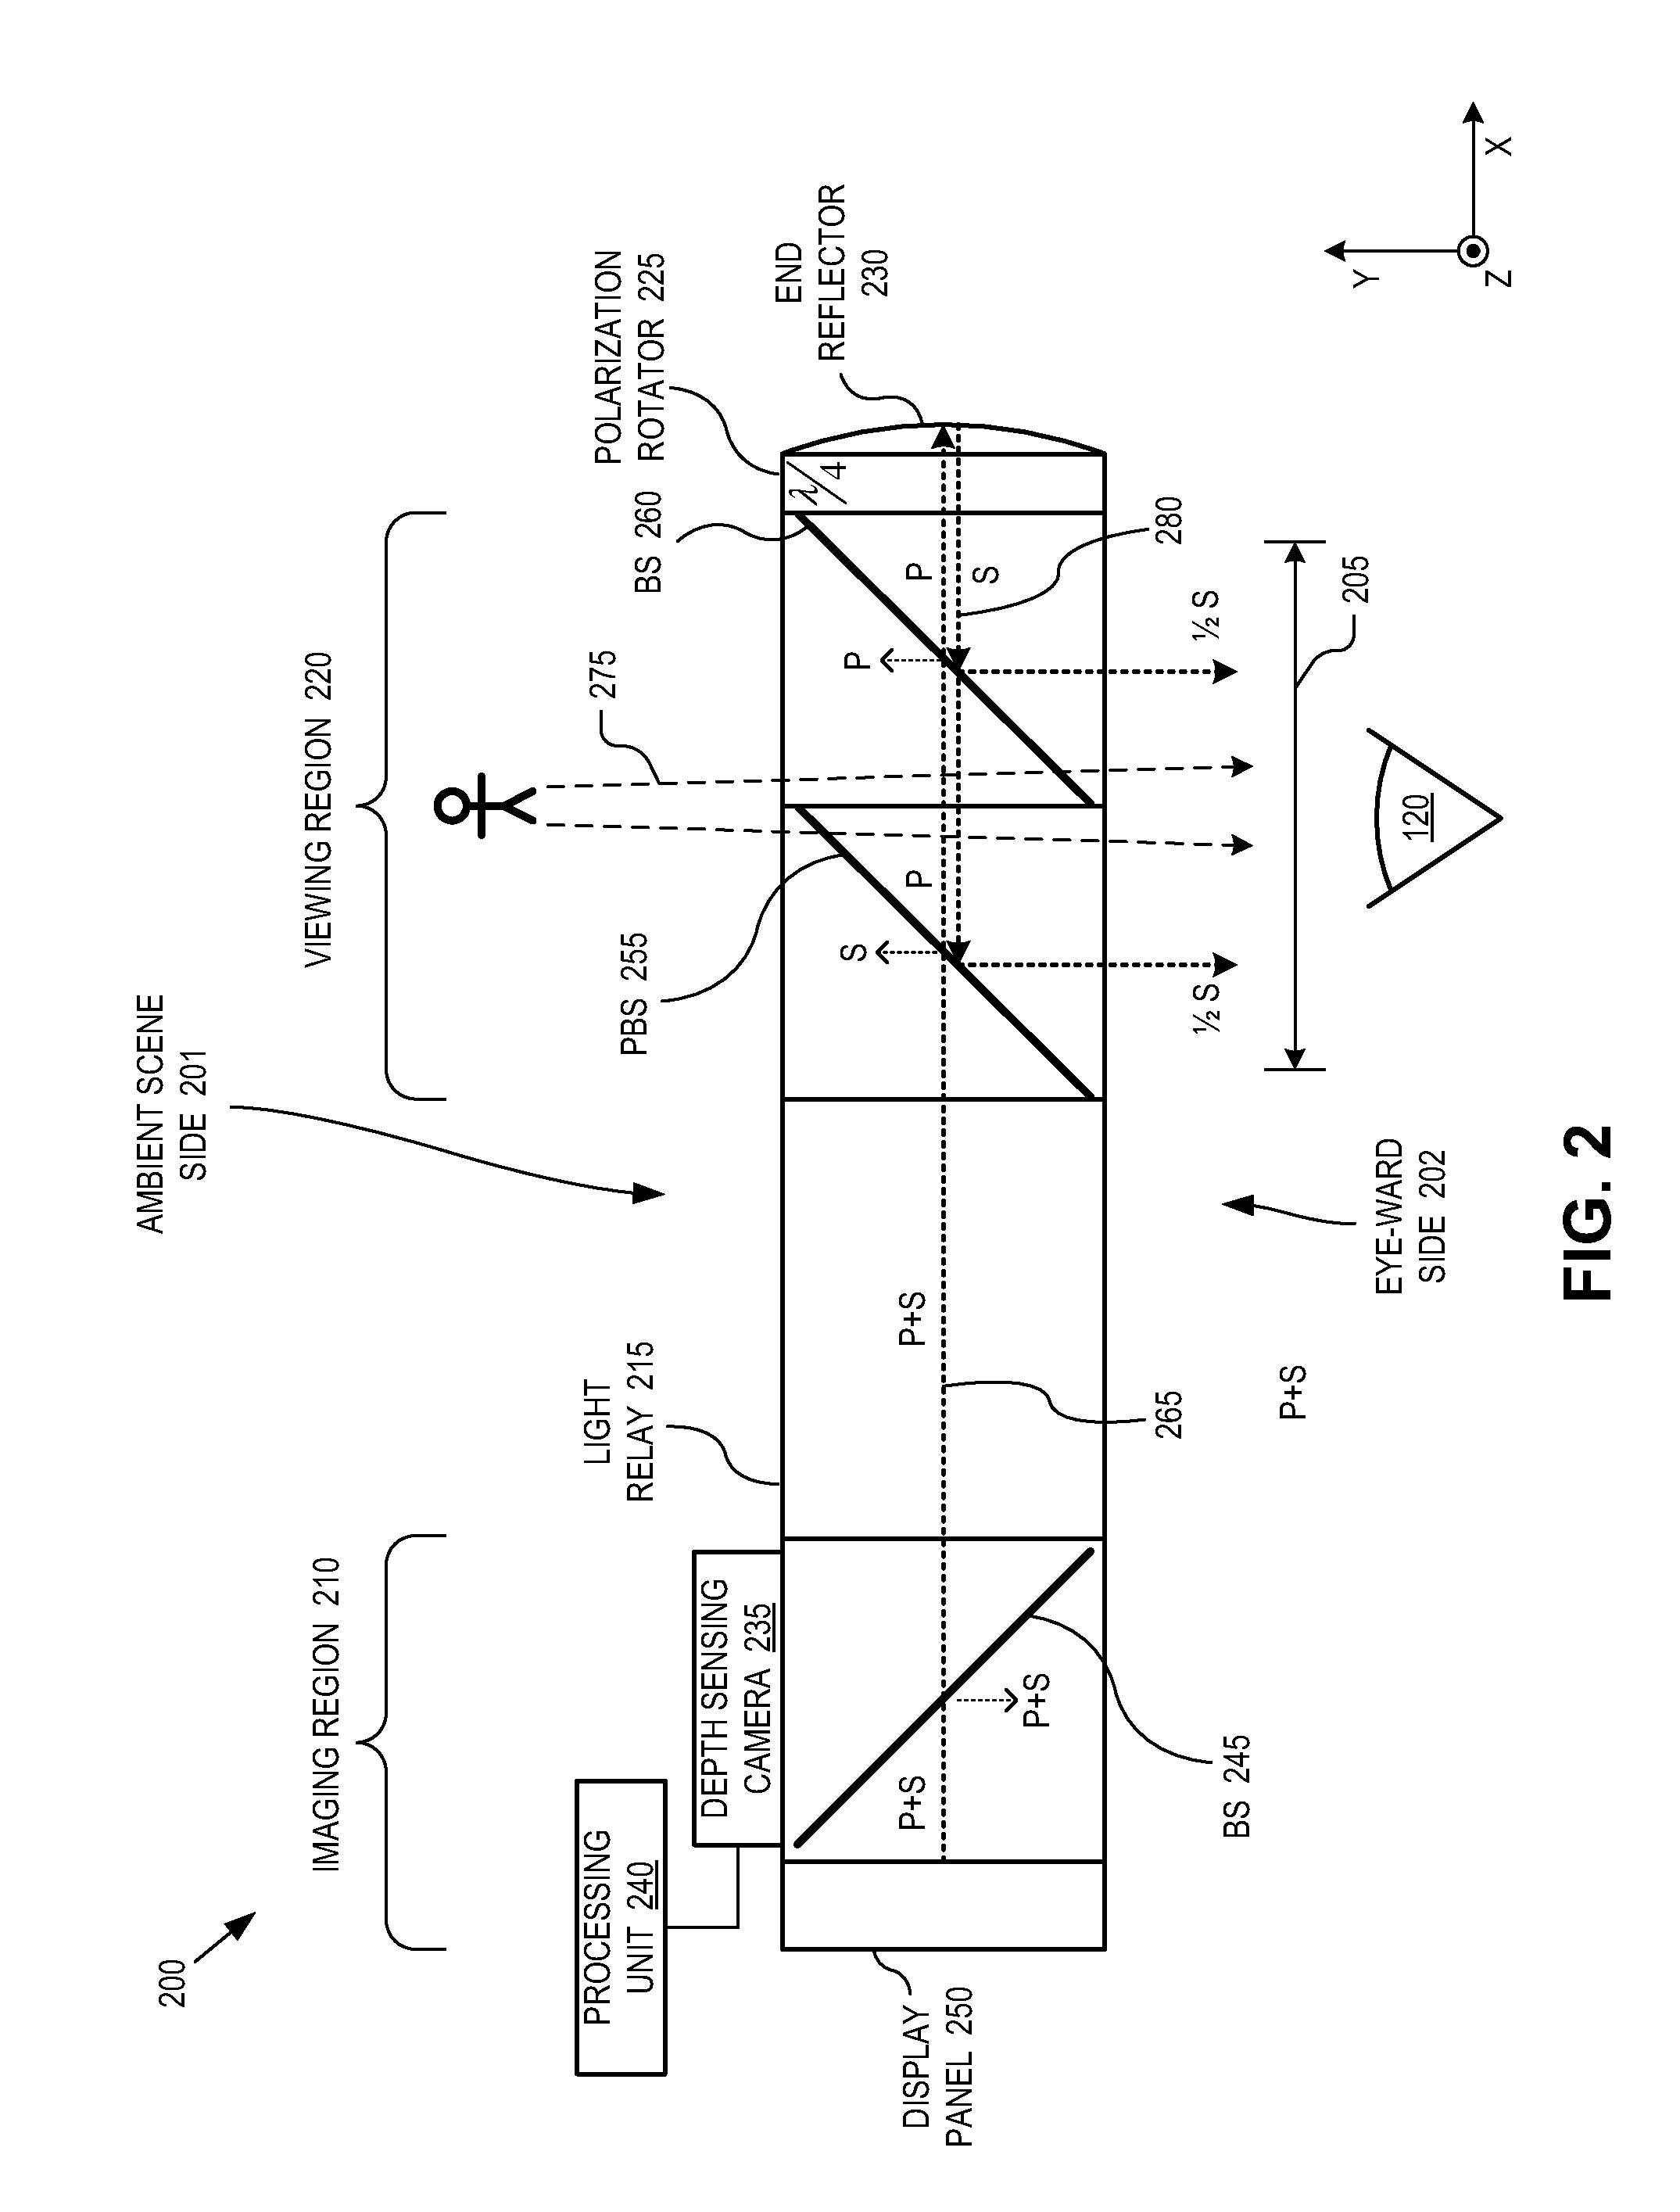 Head mounted display eyepiece with integrated depth sensing